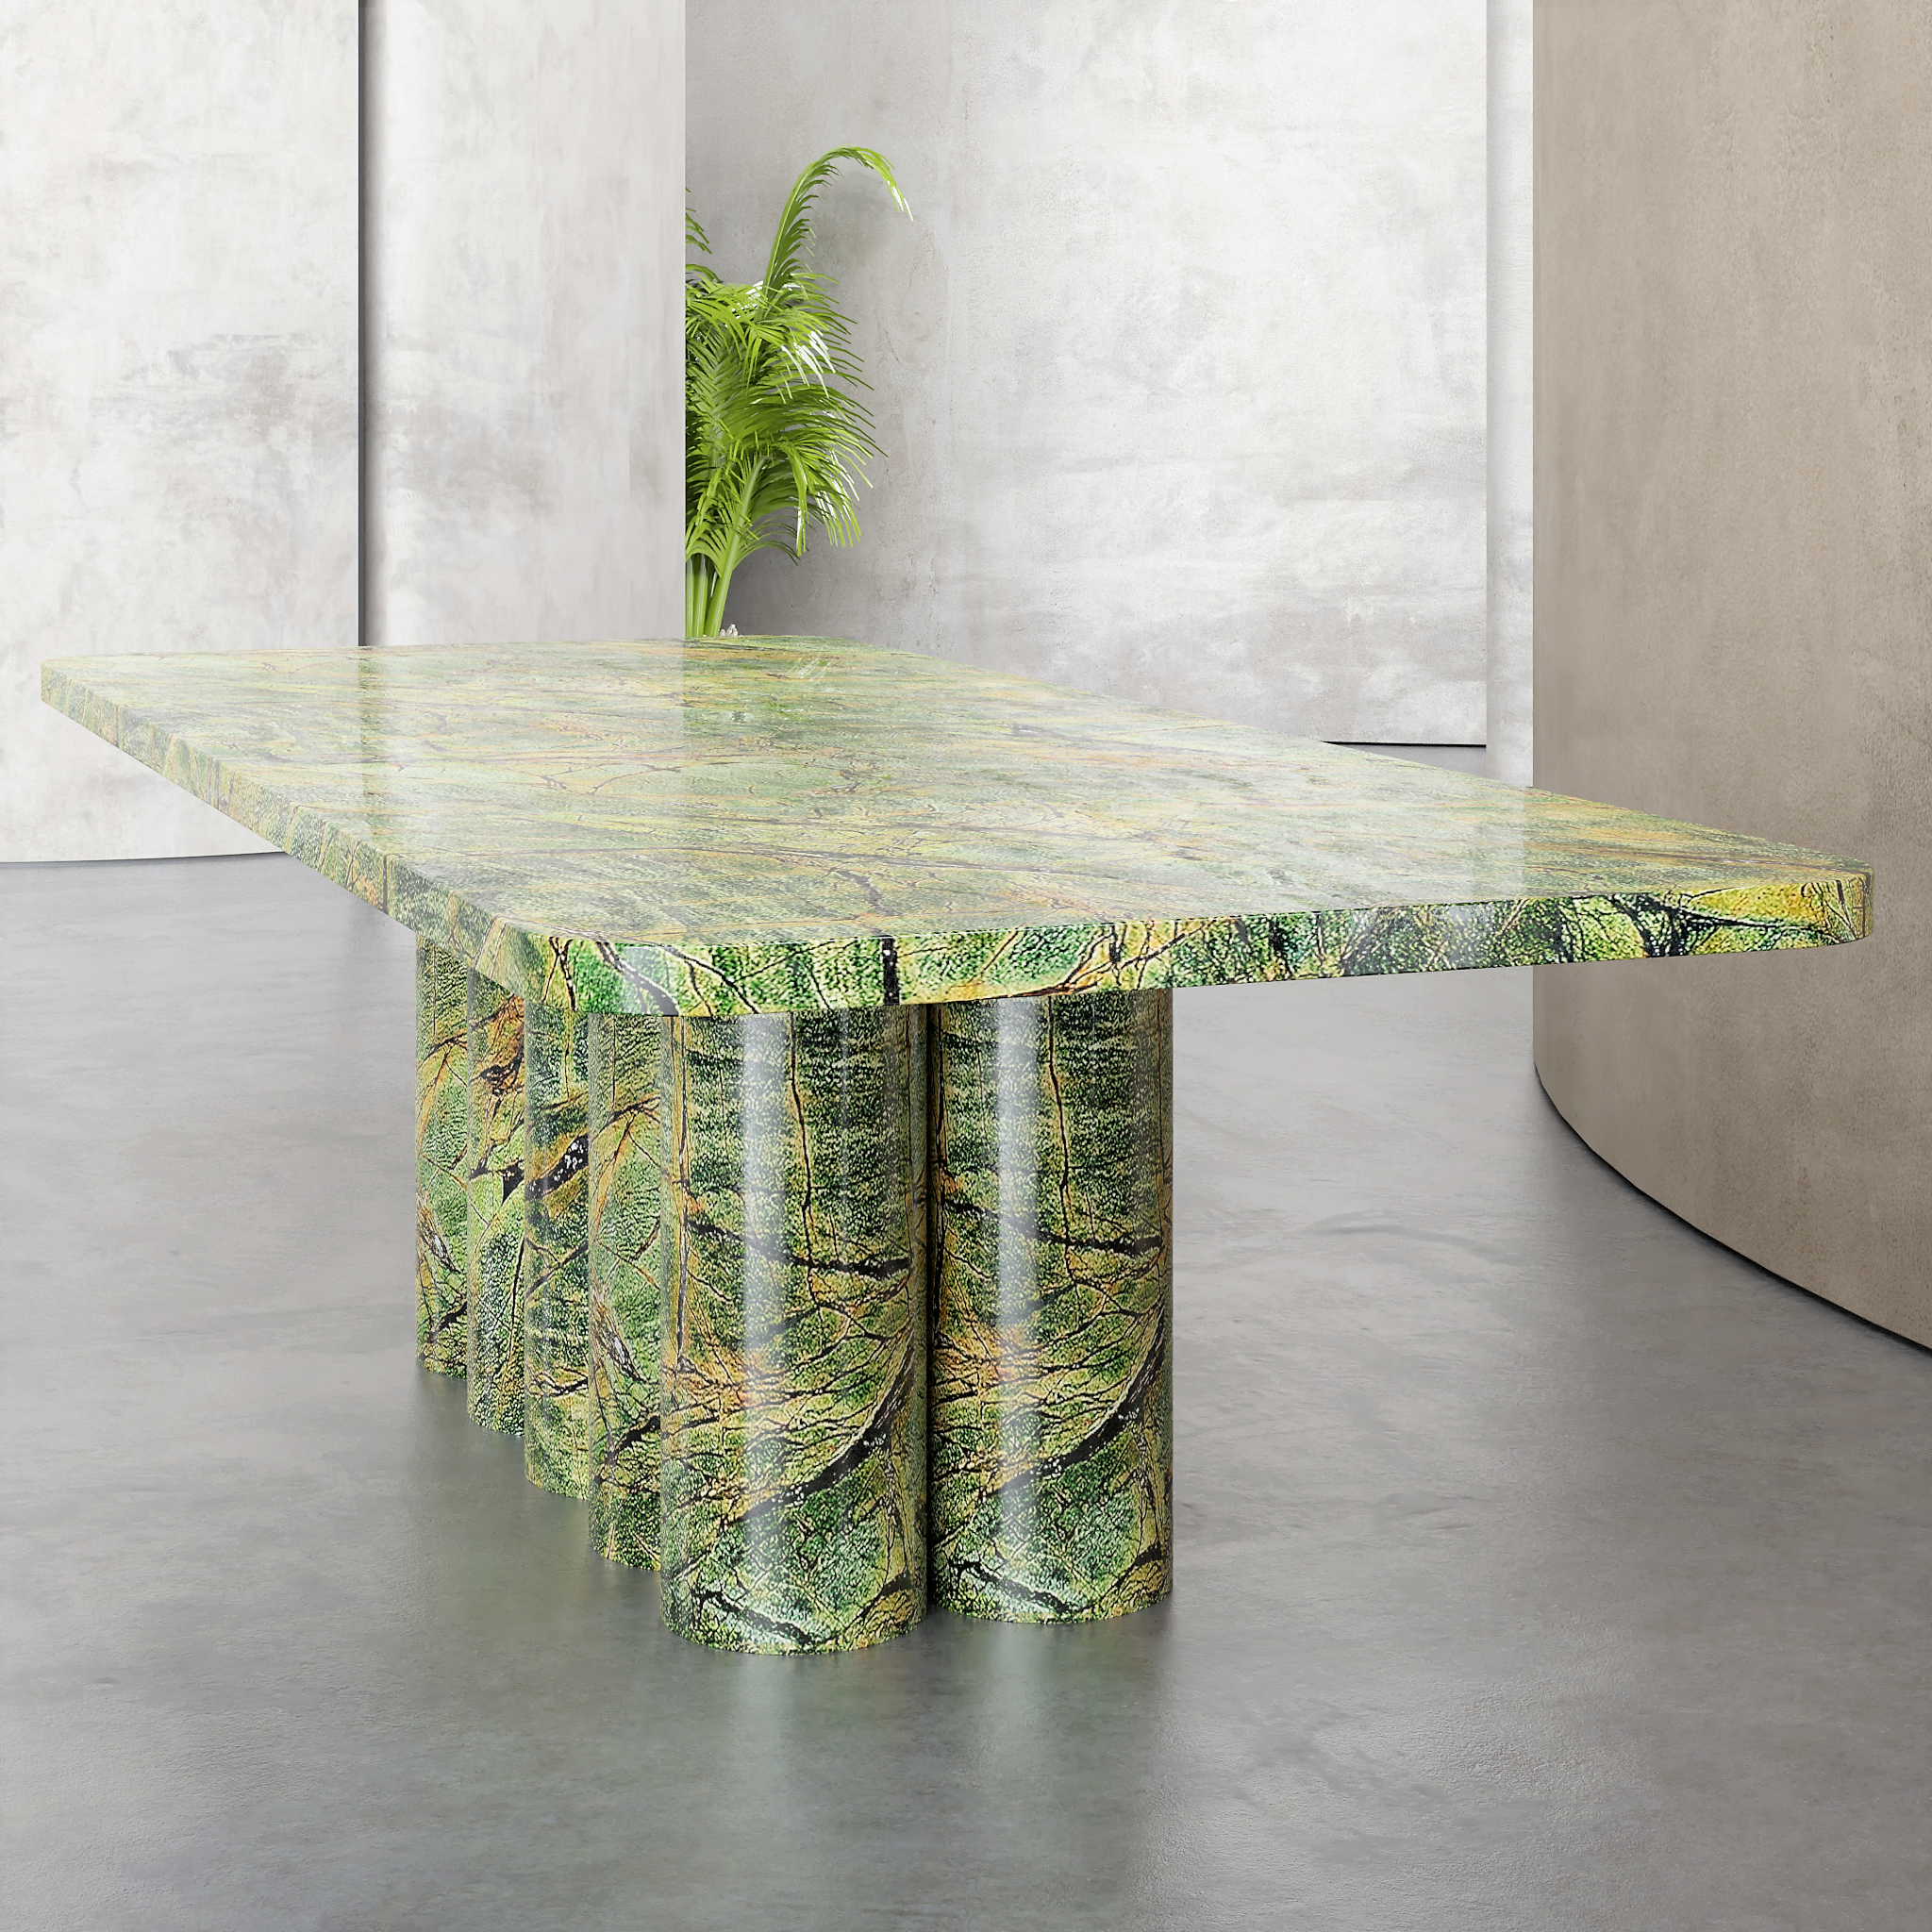 Lumix Dining table